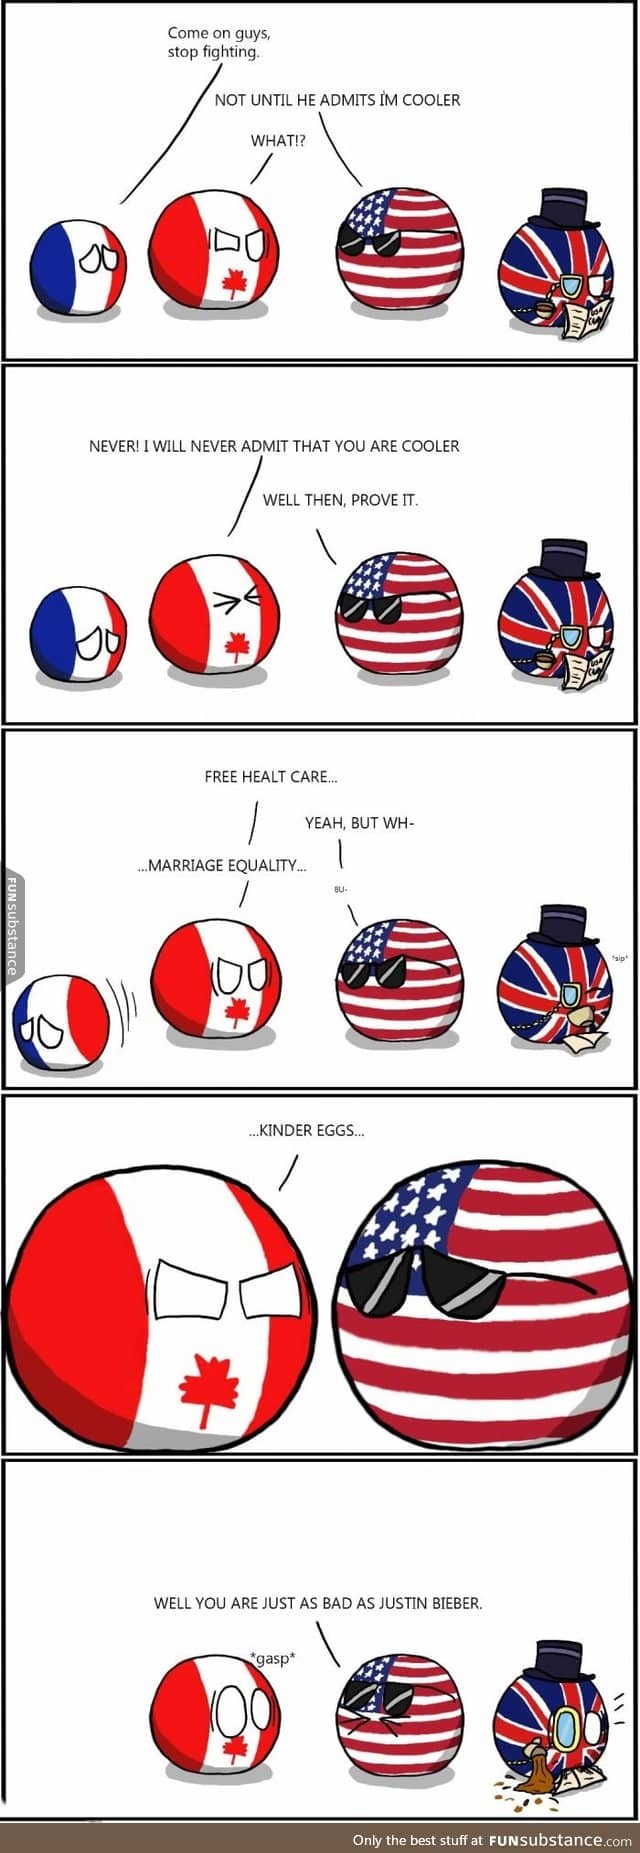 Canada is cool, pun intended